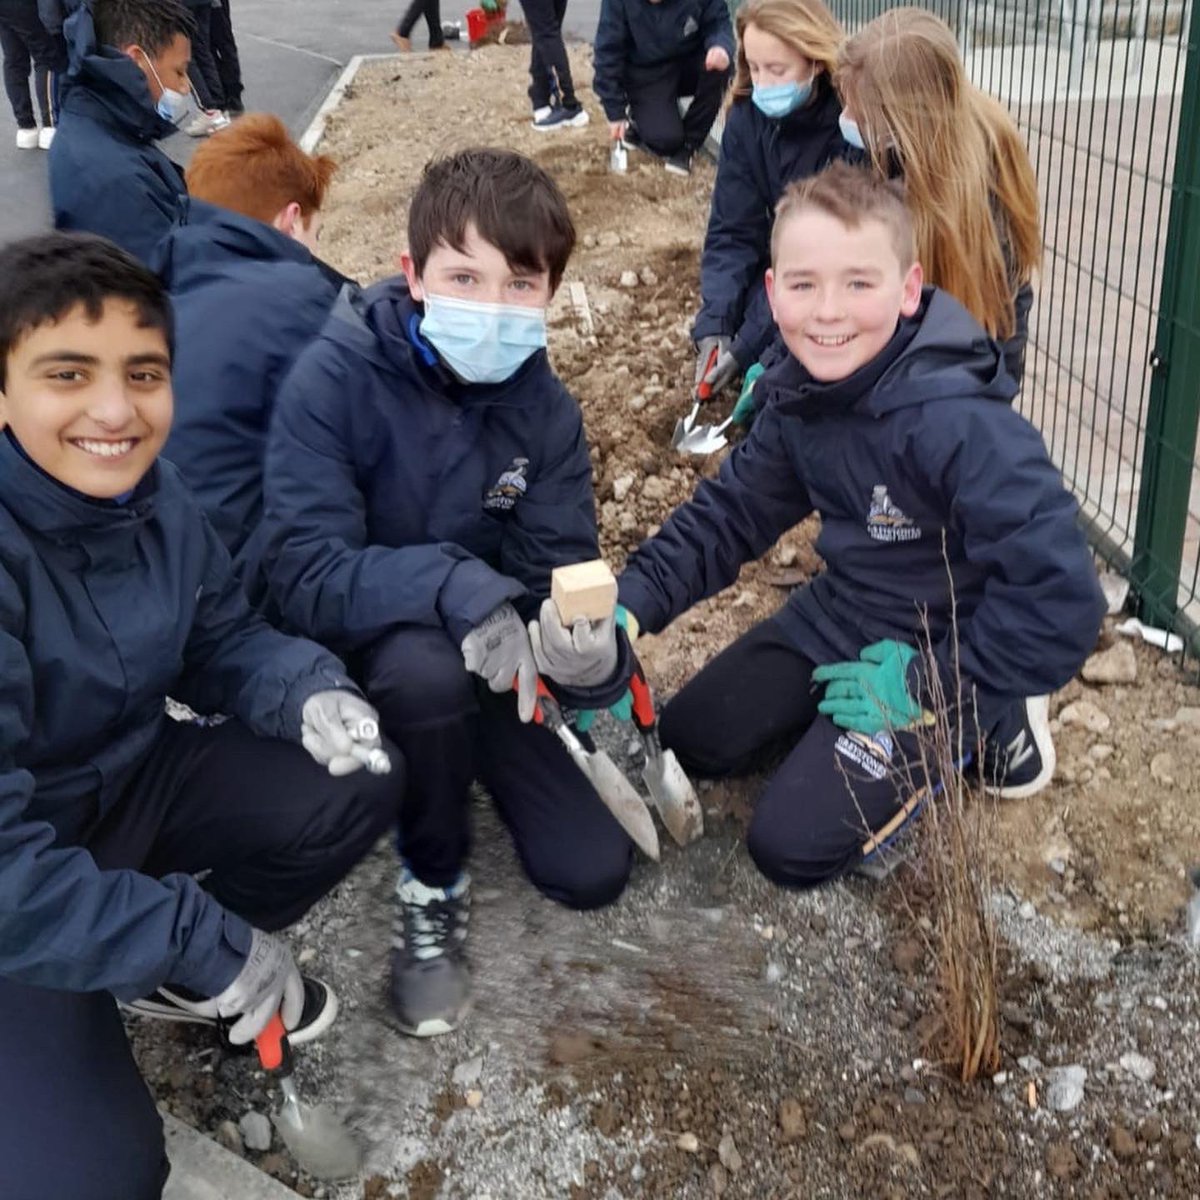 Well done to the 1st years who each planted a tree outside the schools new modular building on Burnaby Mill today, supported by Ms Byrne, Ms Boxall and Mr Farrell. This is part of GCC’s ongoing work to make our community more eco friendly and bio diverse. #nativeirishtrees